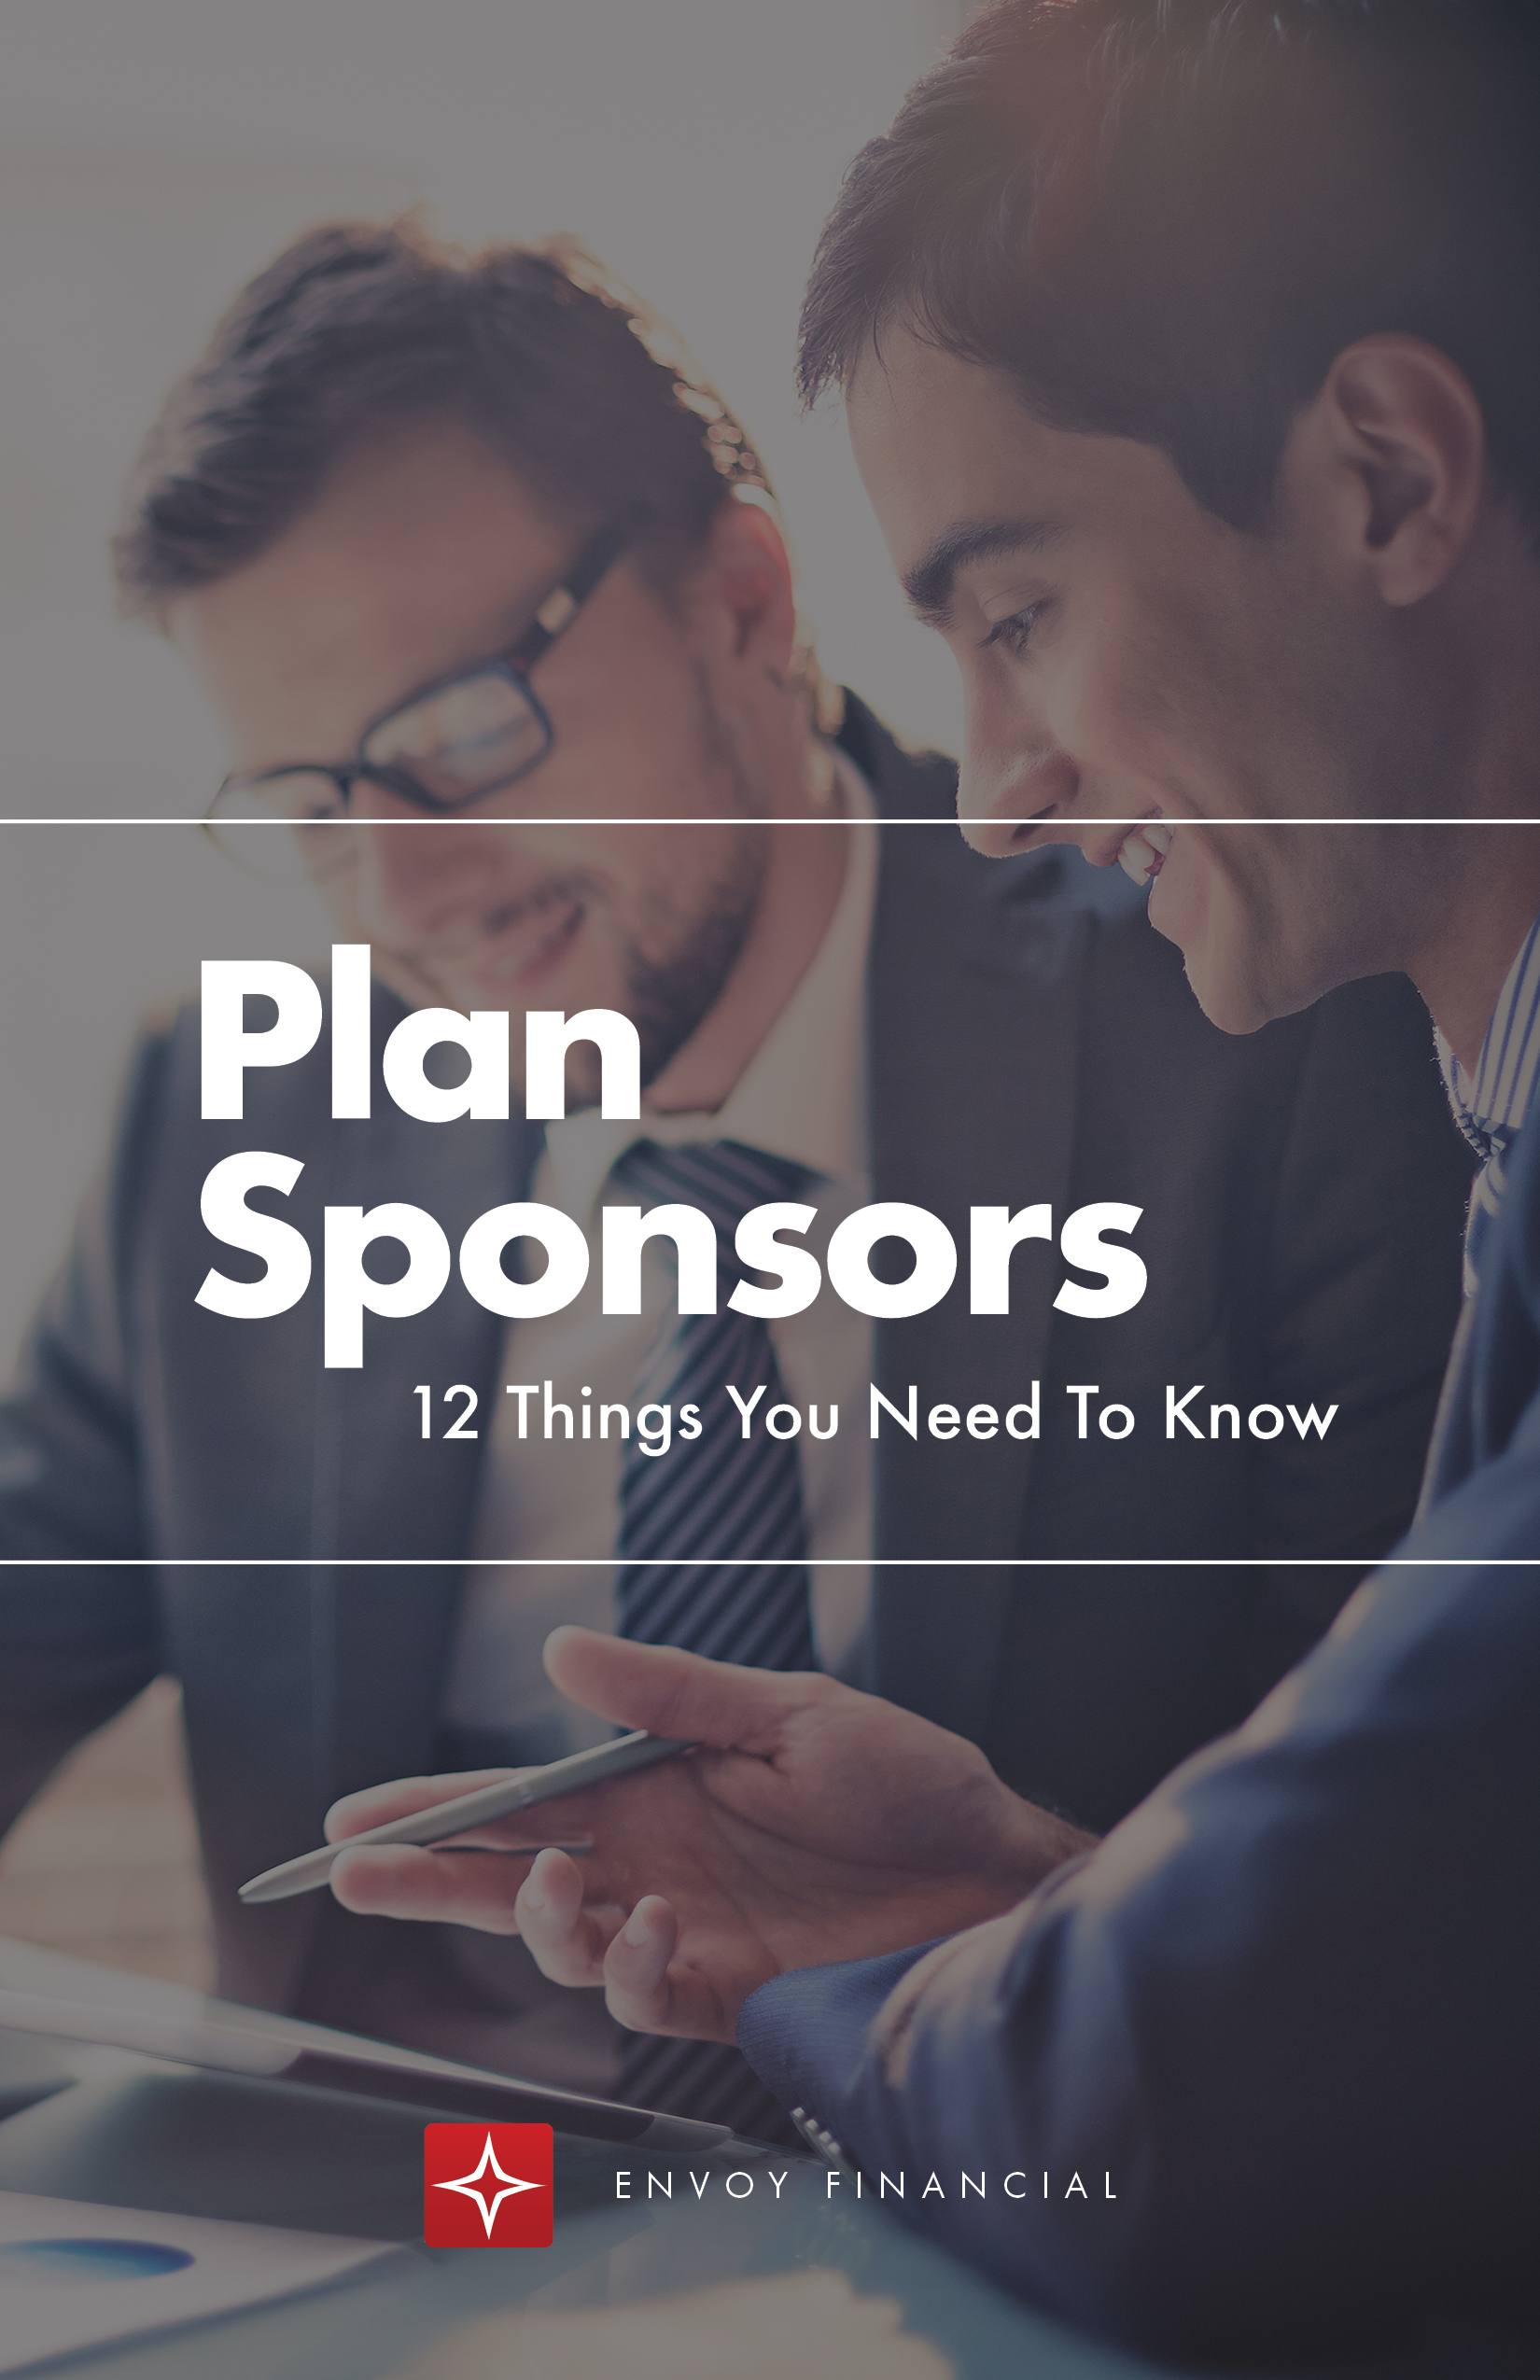 Plan Sponsors - What You Need to Know - eBook.jpg